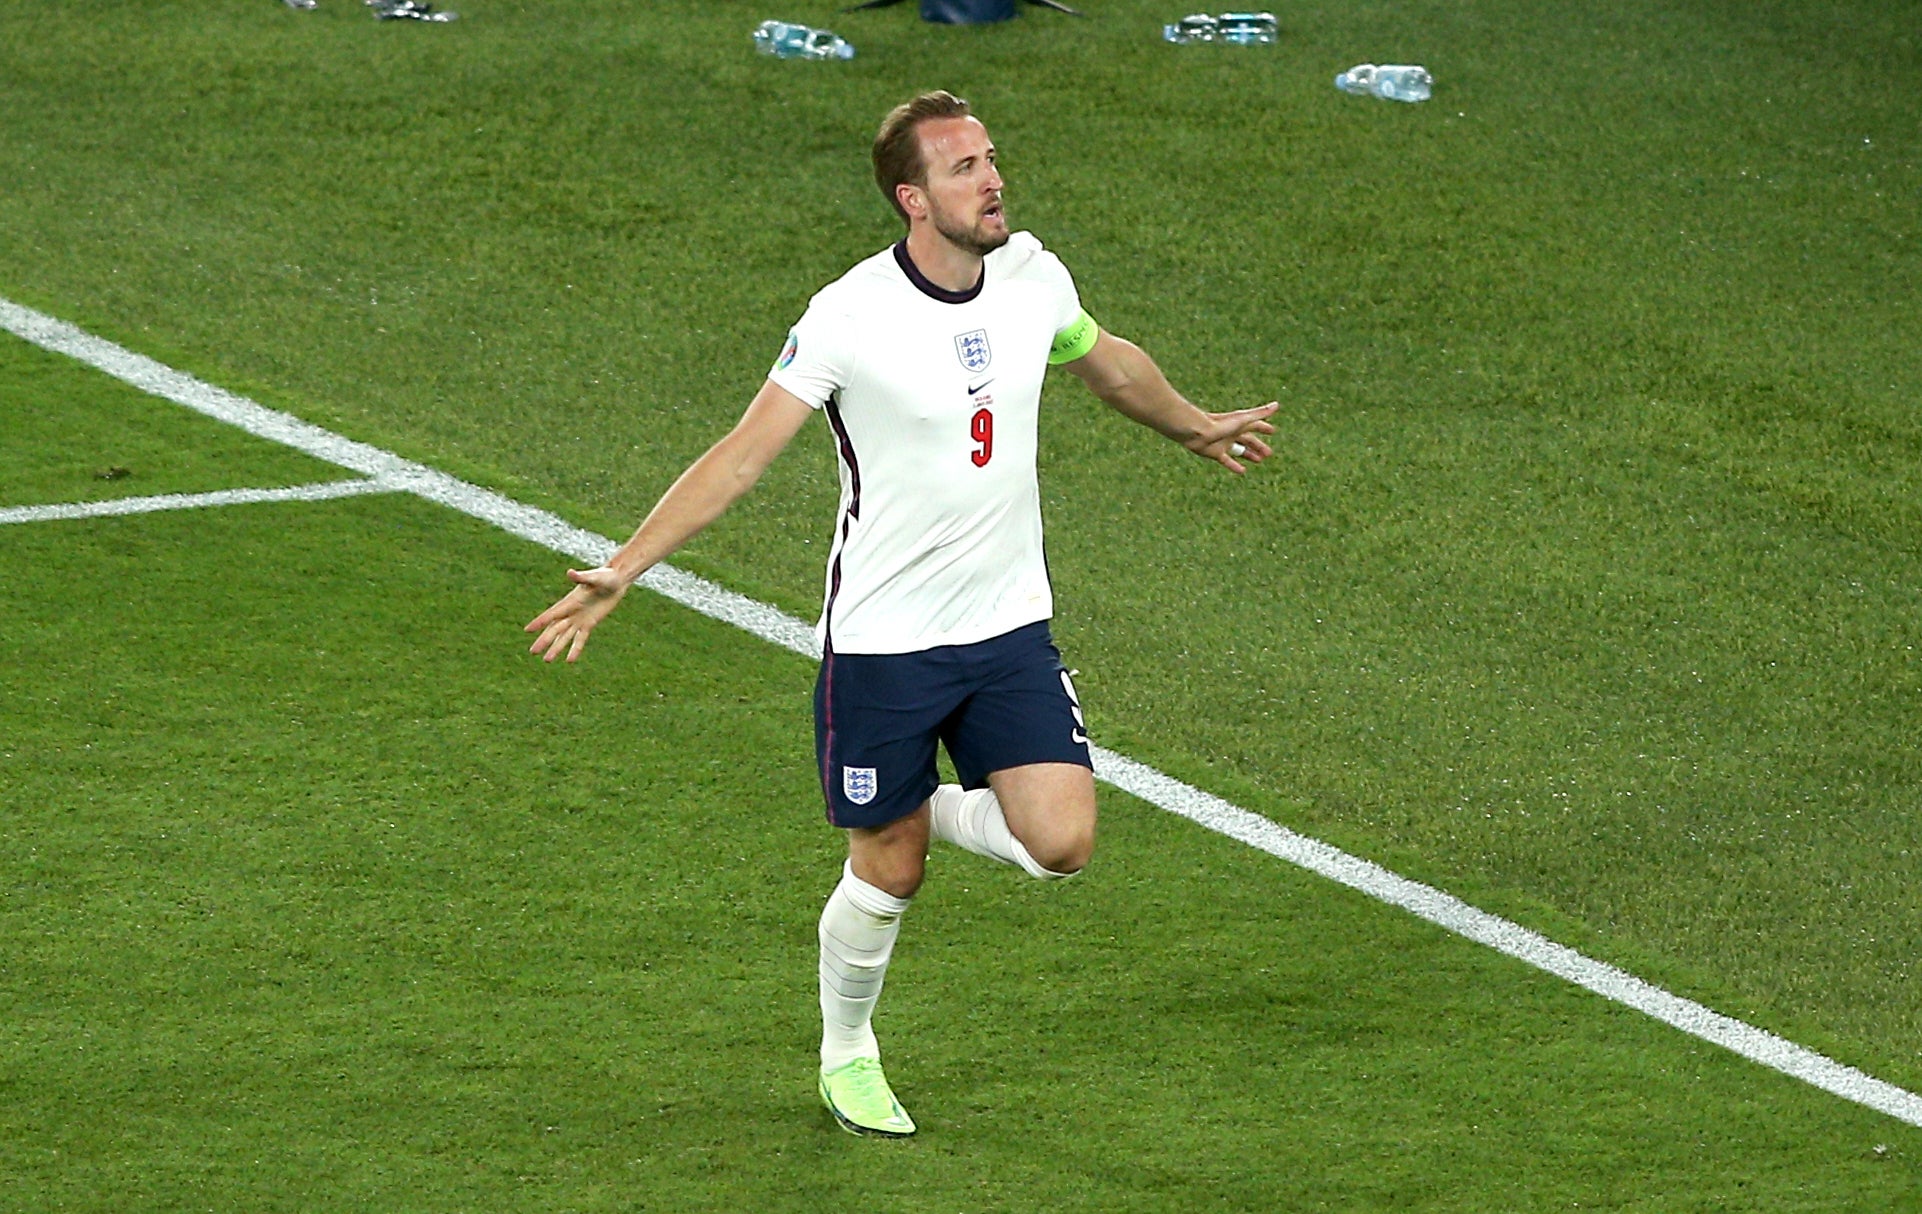 Harry Kane scored twice in England's 4-0 win over Ukraine in the Euro 2020 quarter-finals